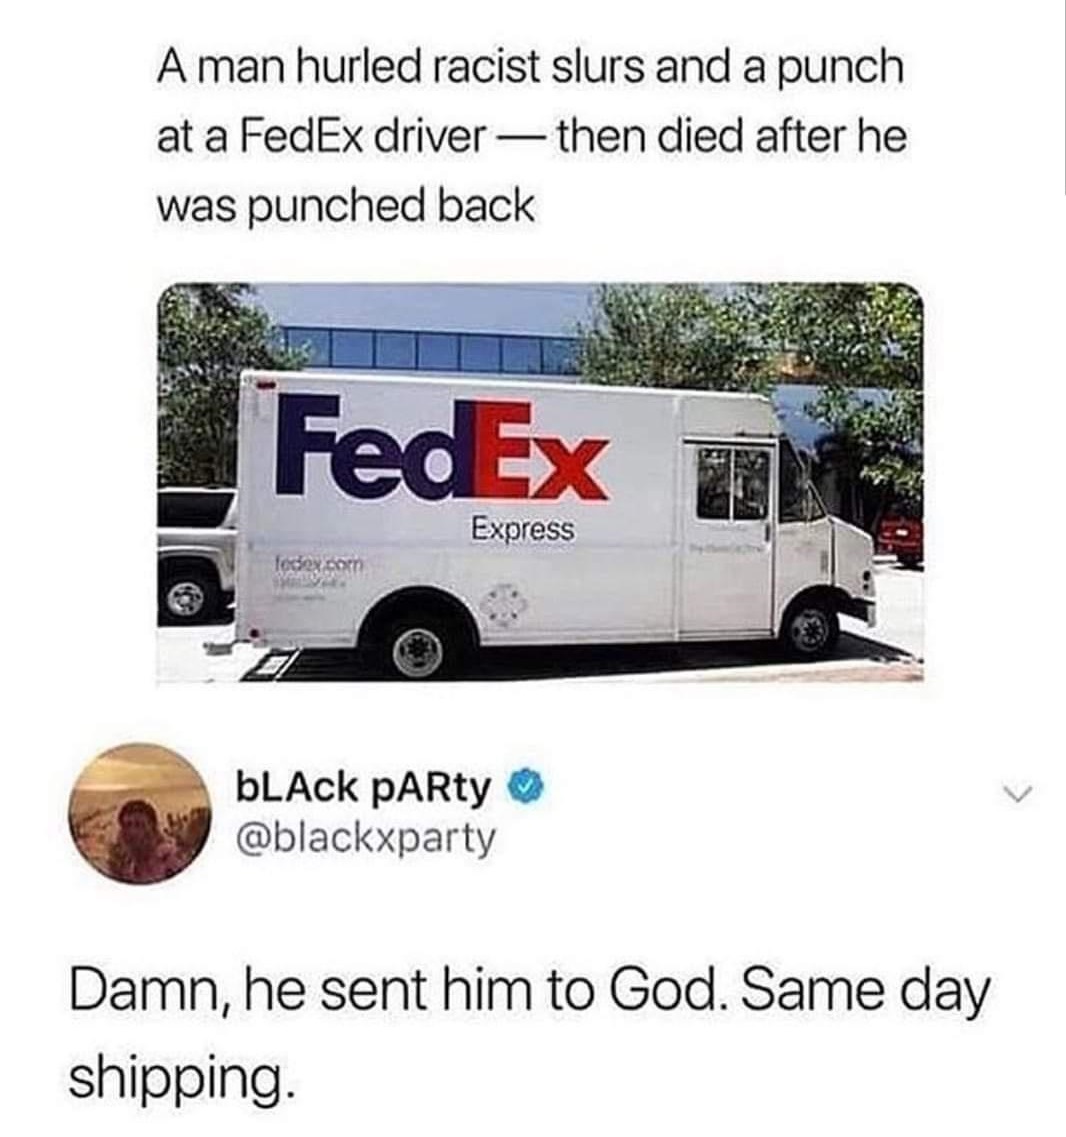 fedex driver same day shipping meme - A man hurled racist slurs and a punch at a FedEx driver then died after he was punched back FedEx Express fedex.com bLACK PARty Damn, he sent him to God. Same day shipping.